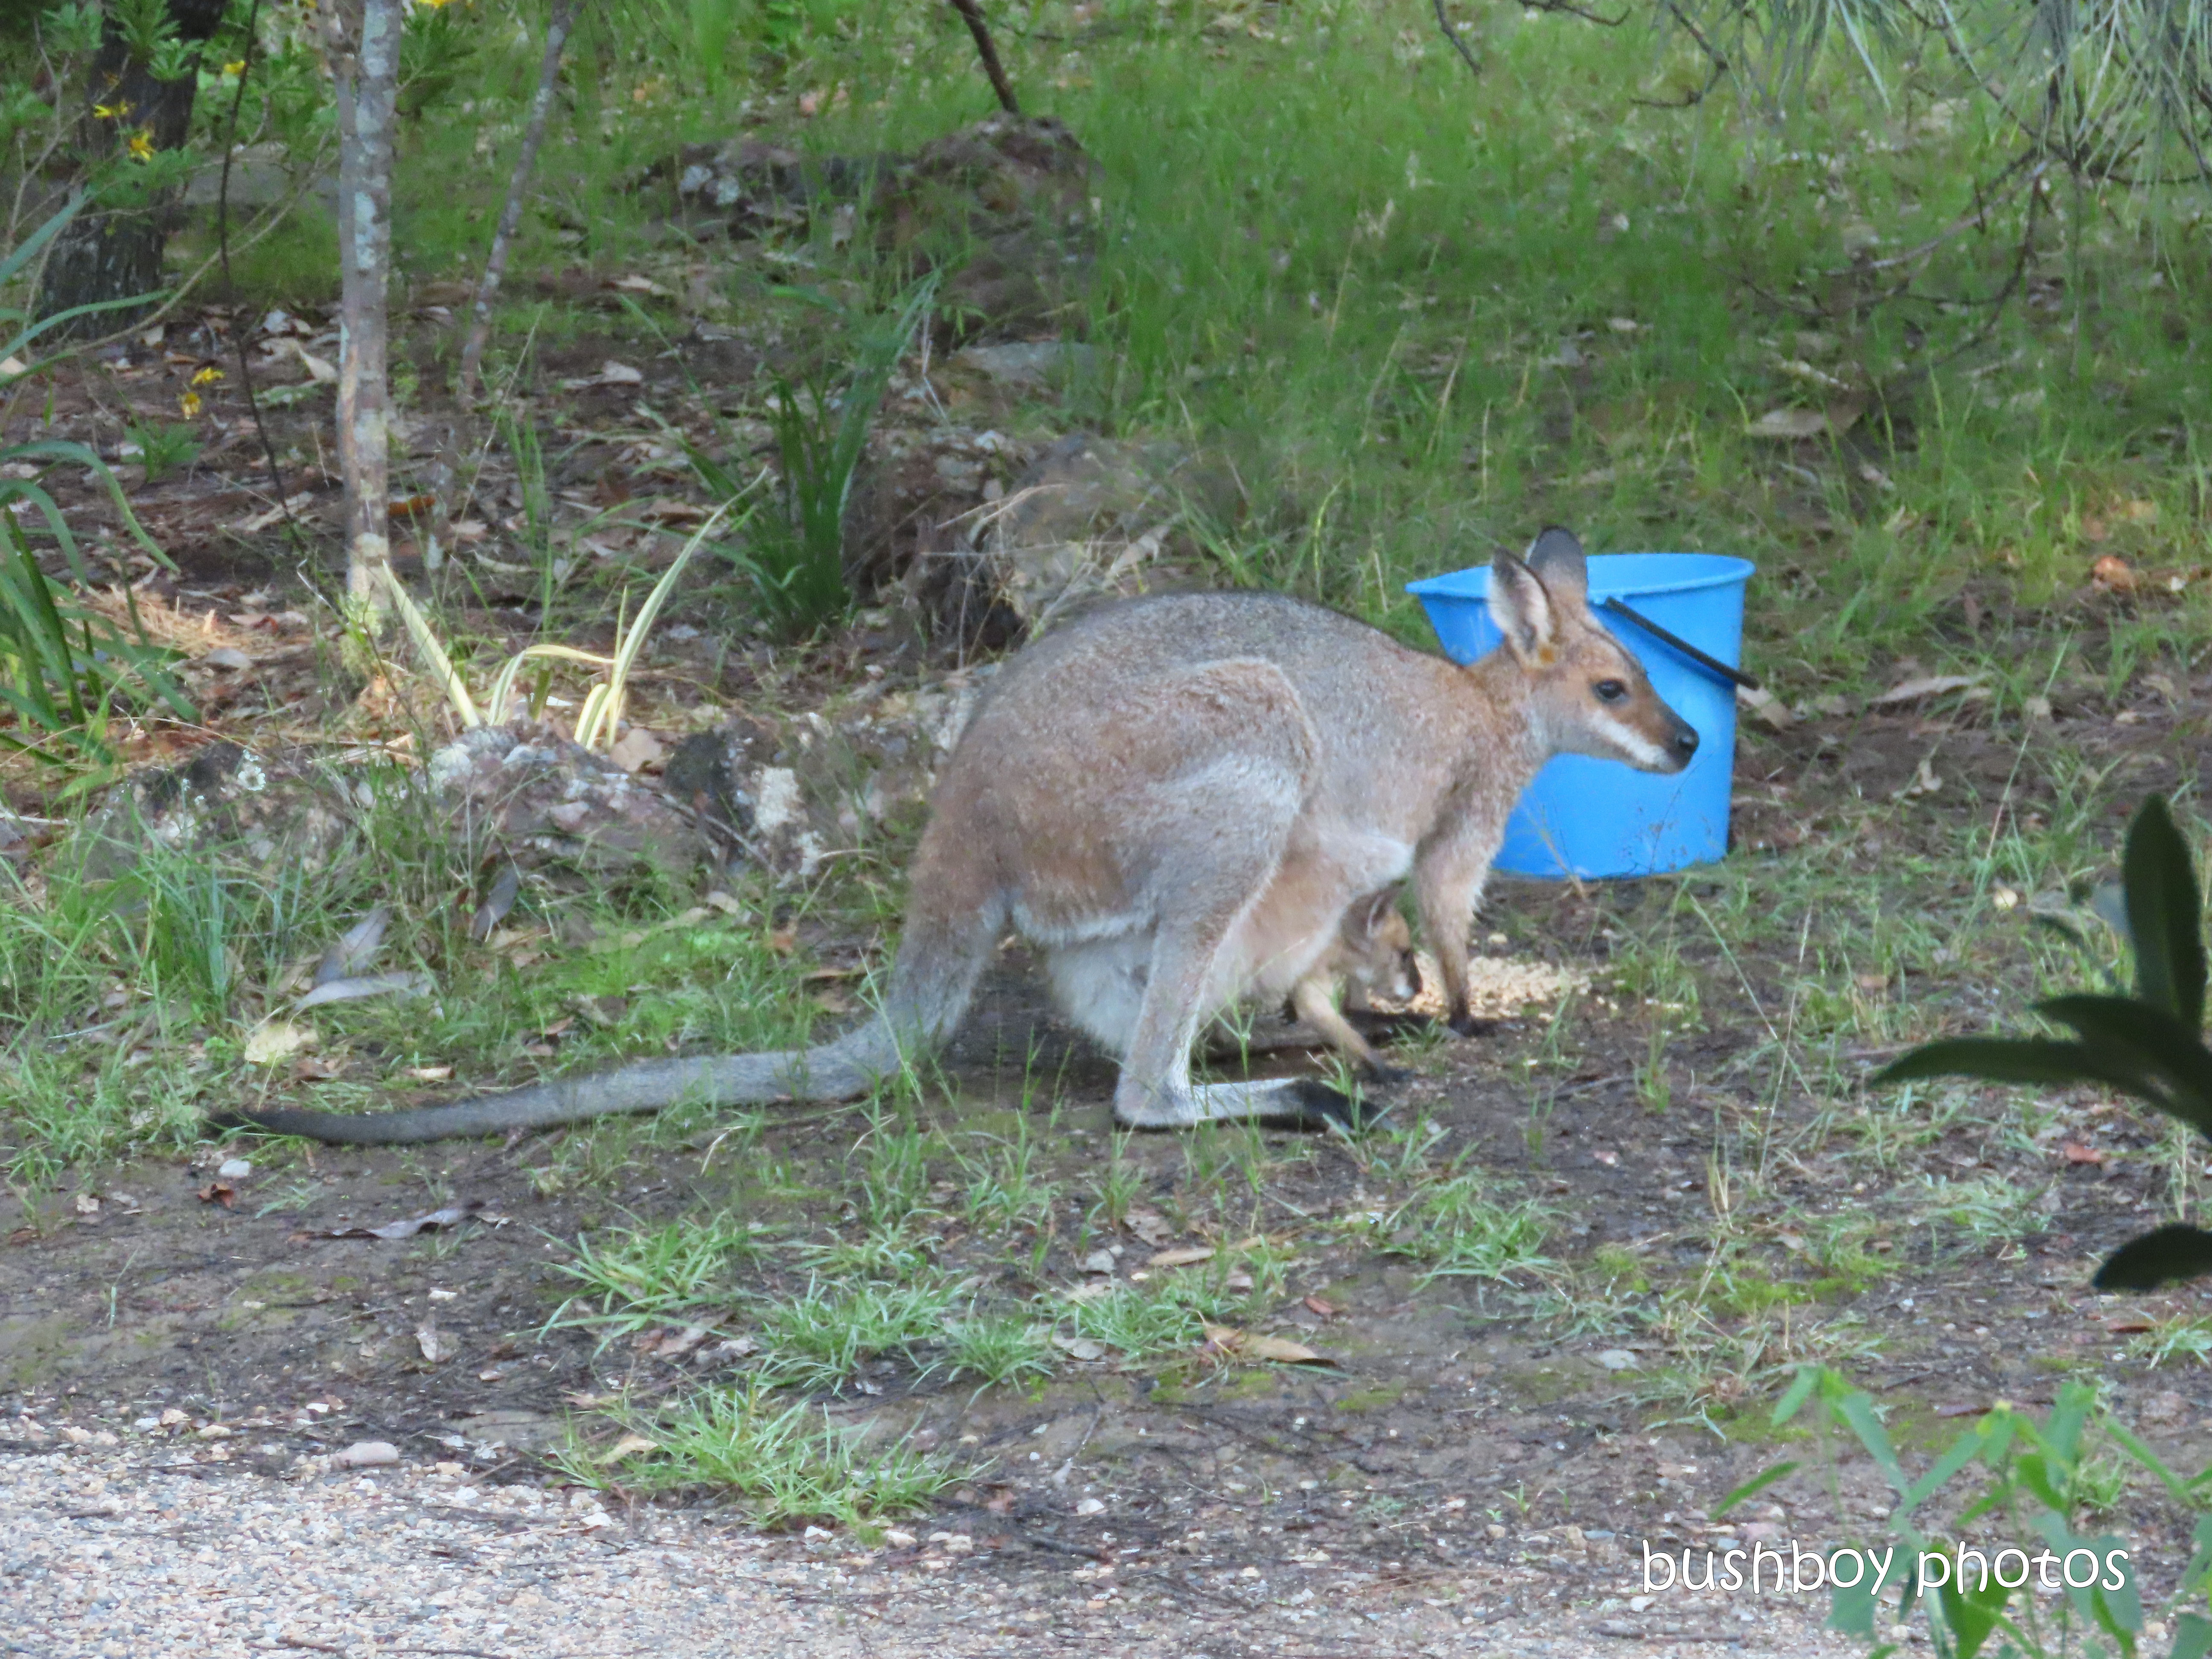 20200326_1_blog challenge_diary_red necked wallaby_joey_home_jackadgery